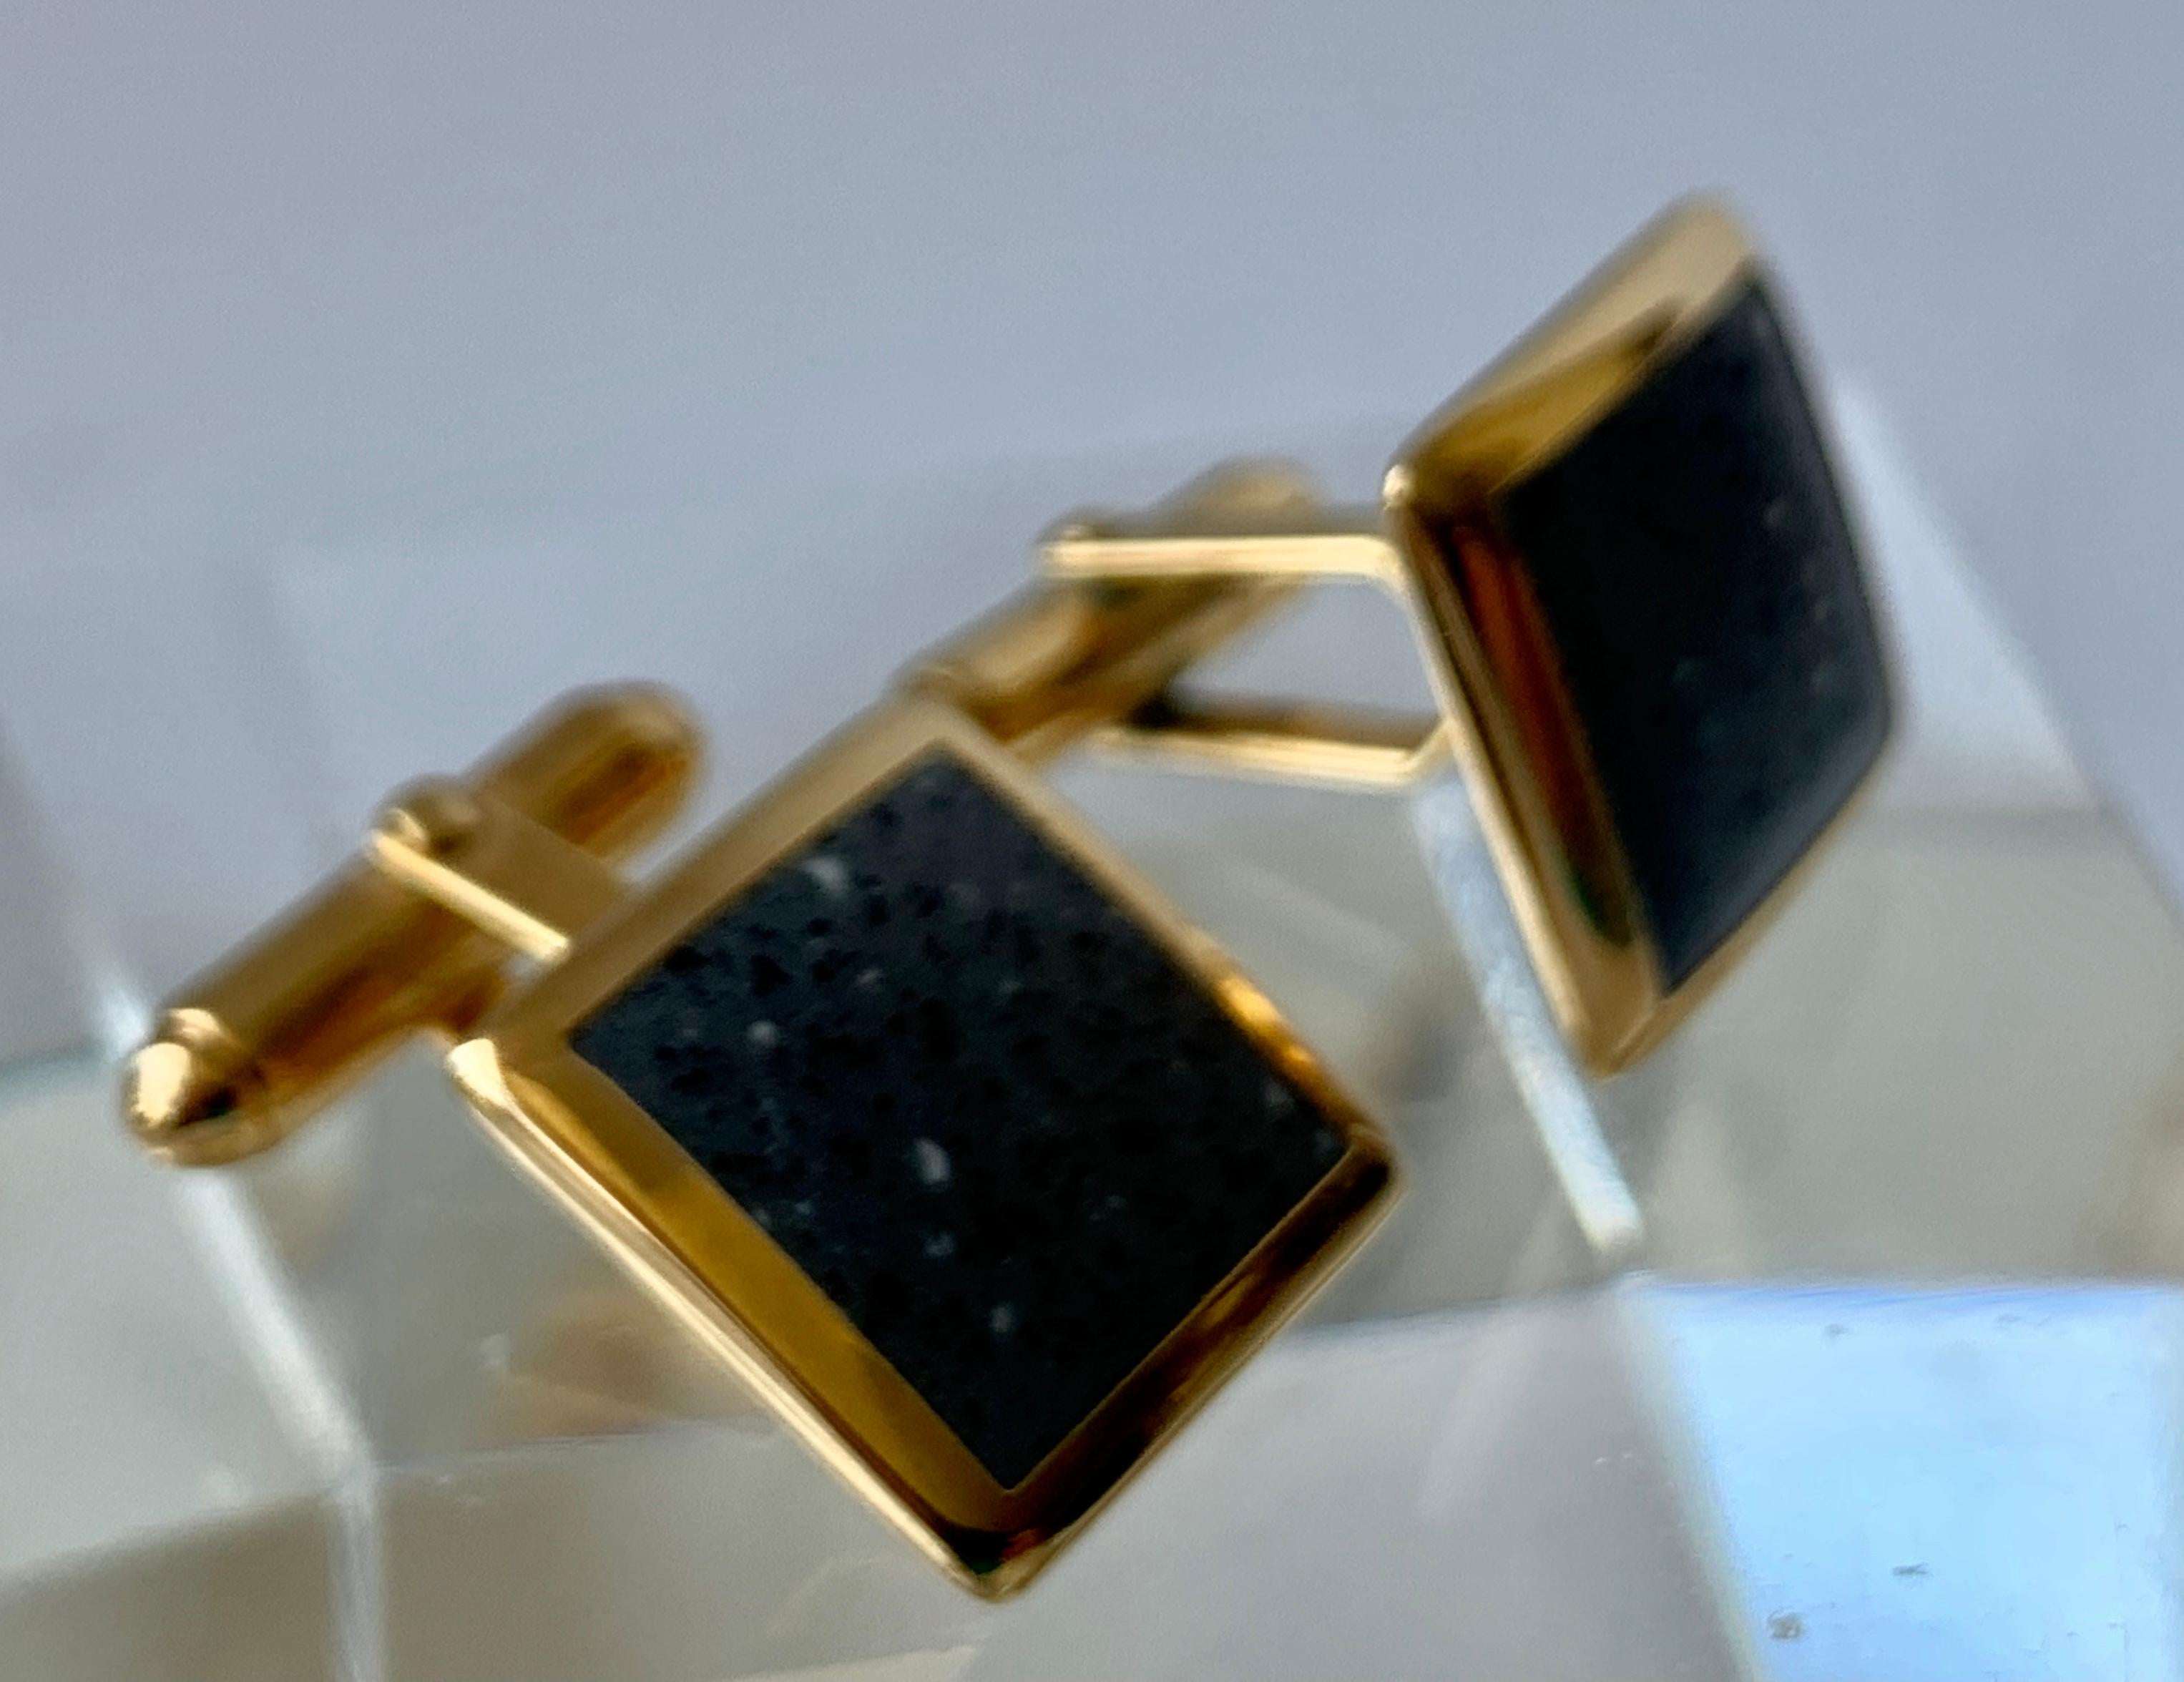 A Pair of Square Cufflinks with Grey Speckled Enamel and 